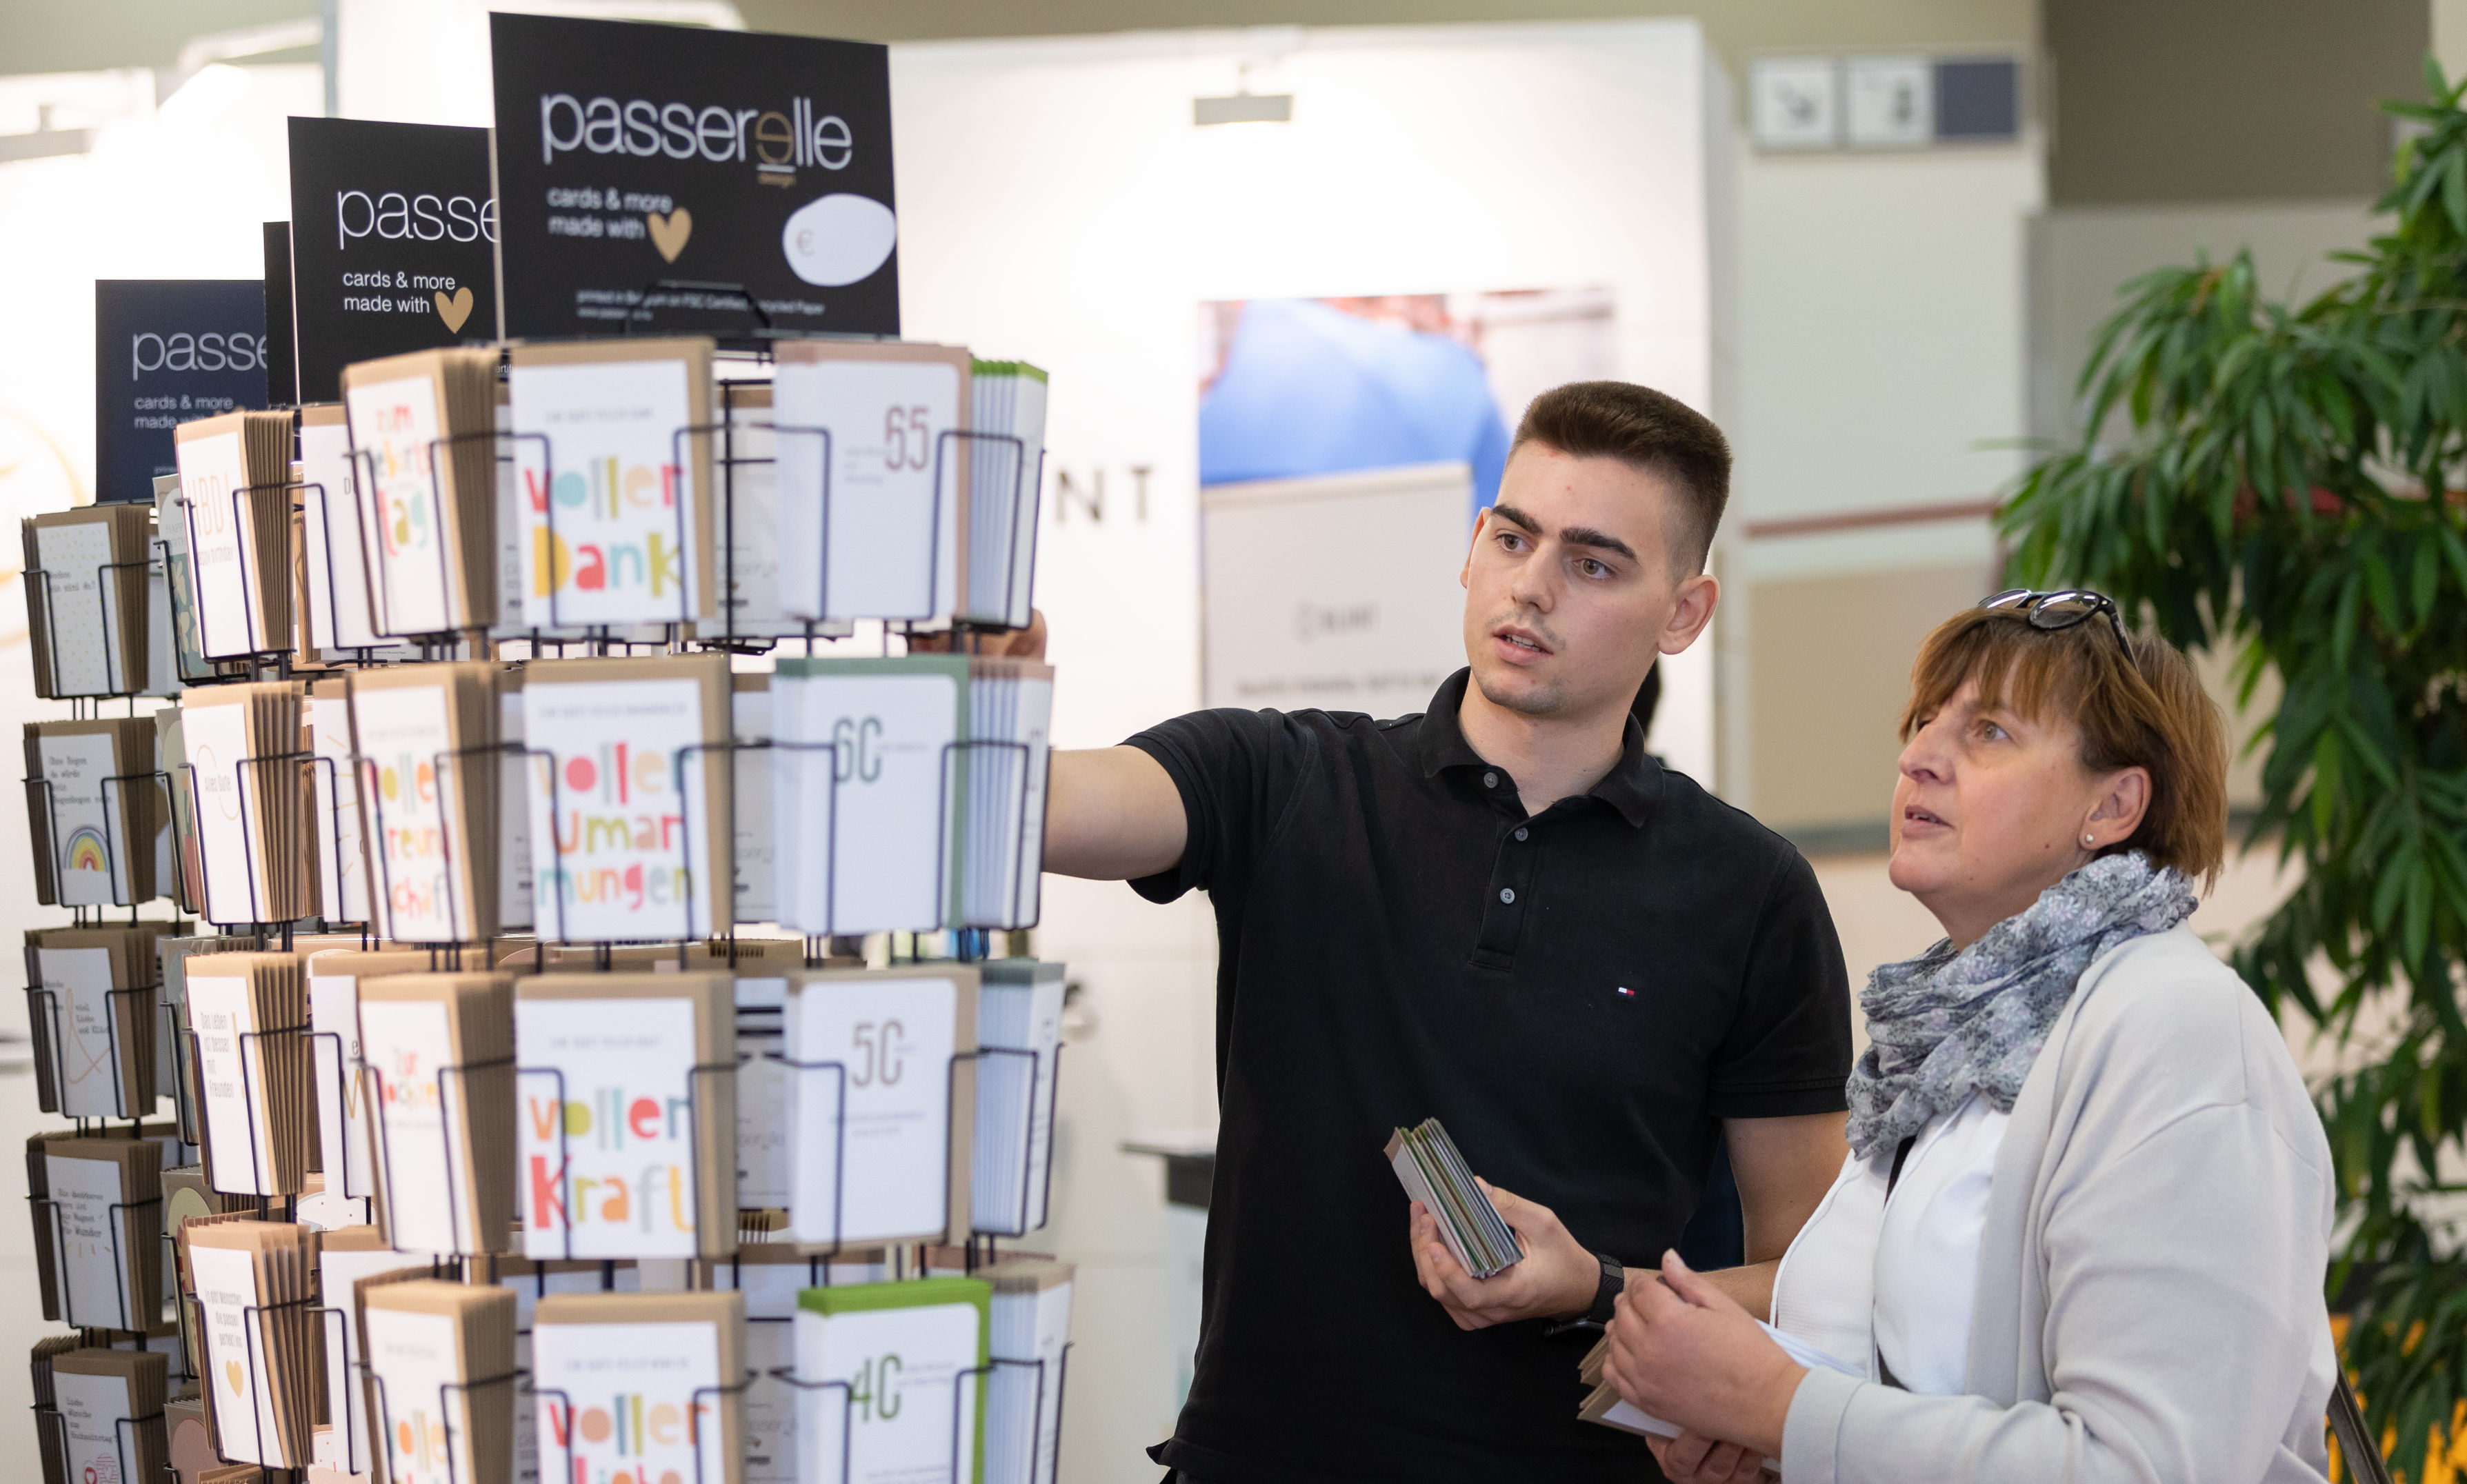 Sales talk at the Passerelle Design greeting card stand.